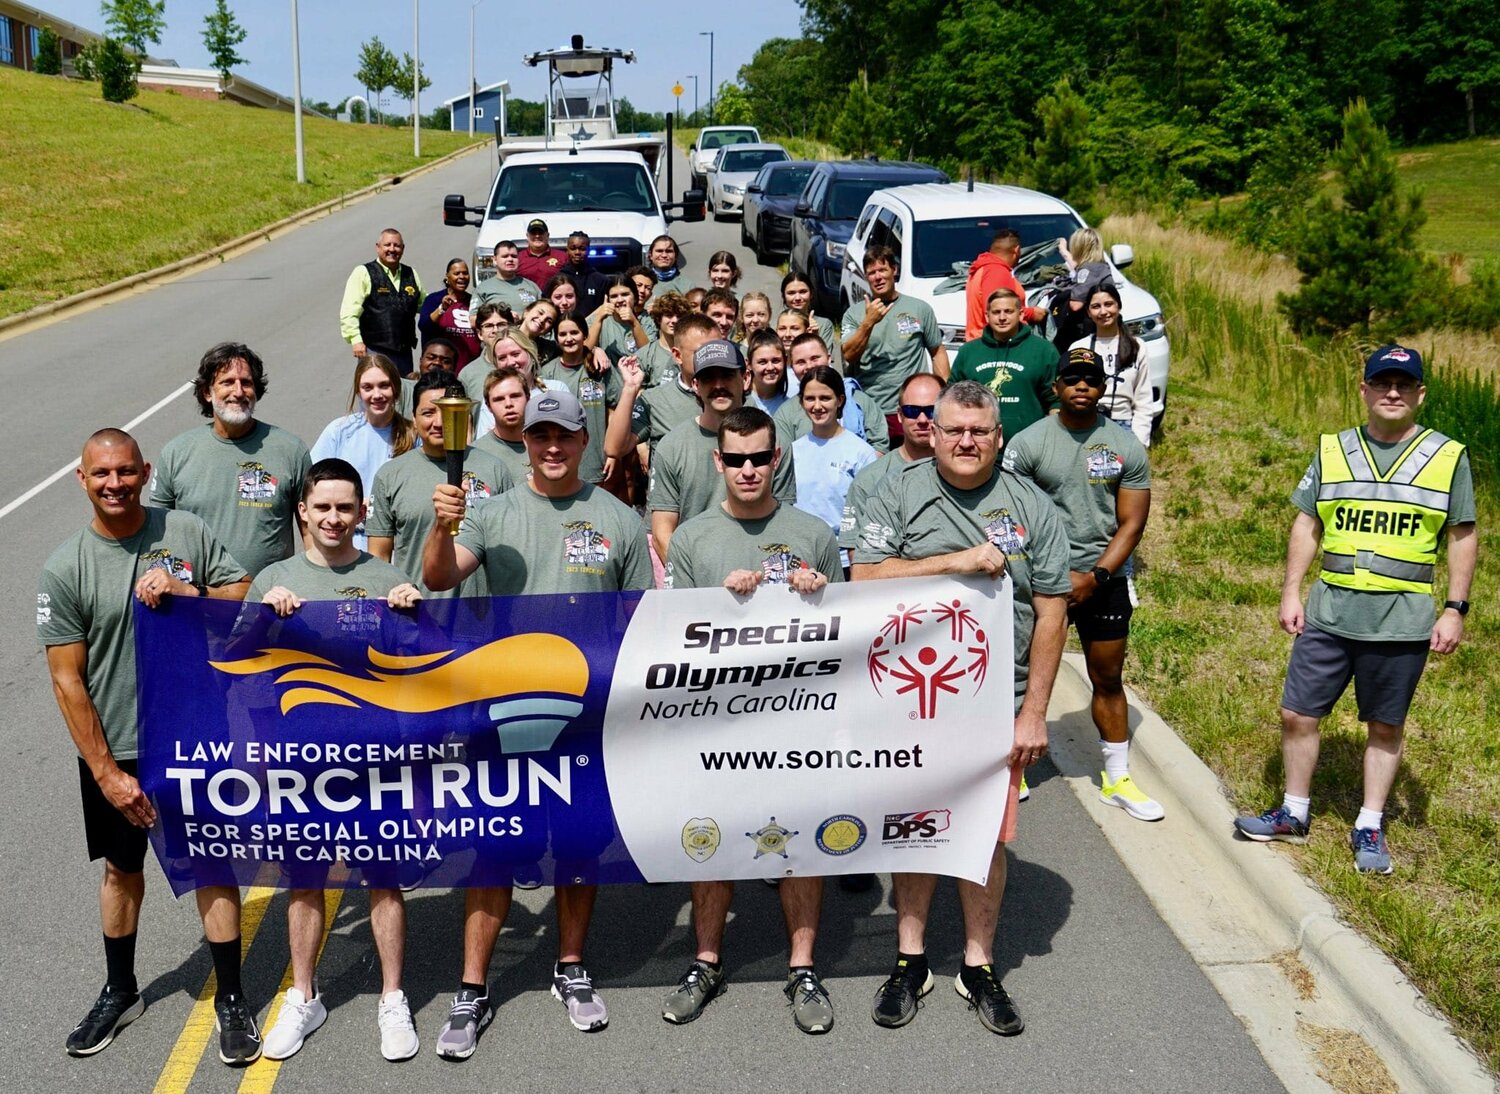 The Chatham County Sheriff's Office participated in the annual Law Enforcement Torch Run in support of Special Olympics of North Carolina. The Torch started in Wilmington and will end in Raleigh on June 2nd with the lighting of the cauldron at the start of the Summer Games. 'The excitement was palpable,' said Sheriff Mike Roberson in a Facebook post. 'Thank you to all the staff that planned, setup, and organized the event.'